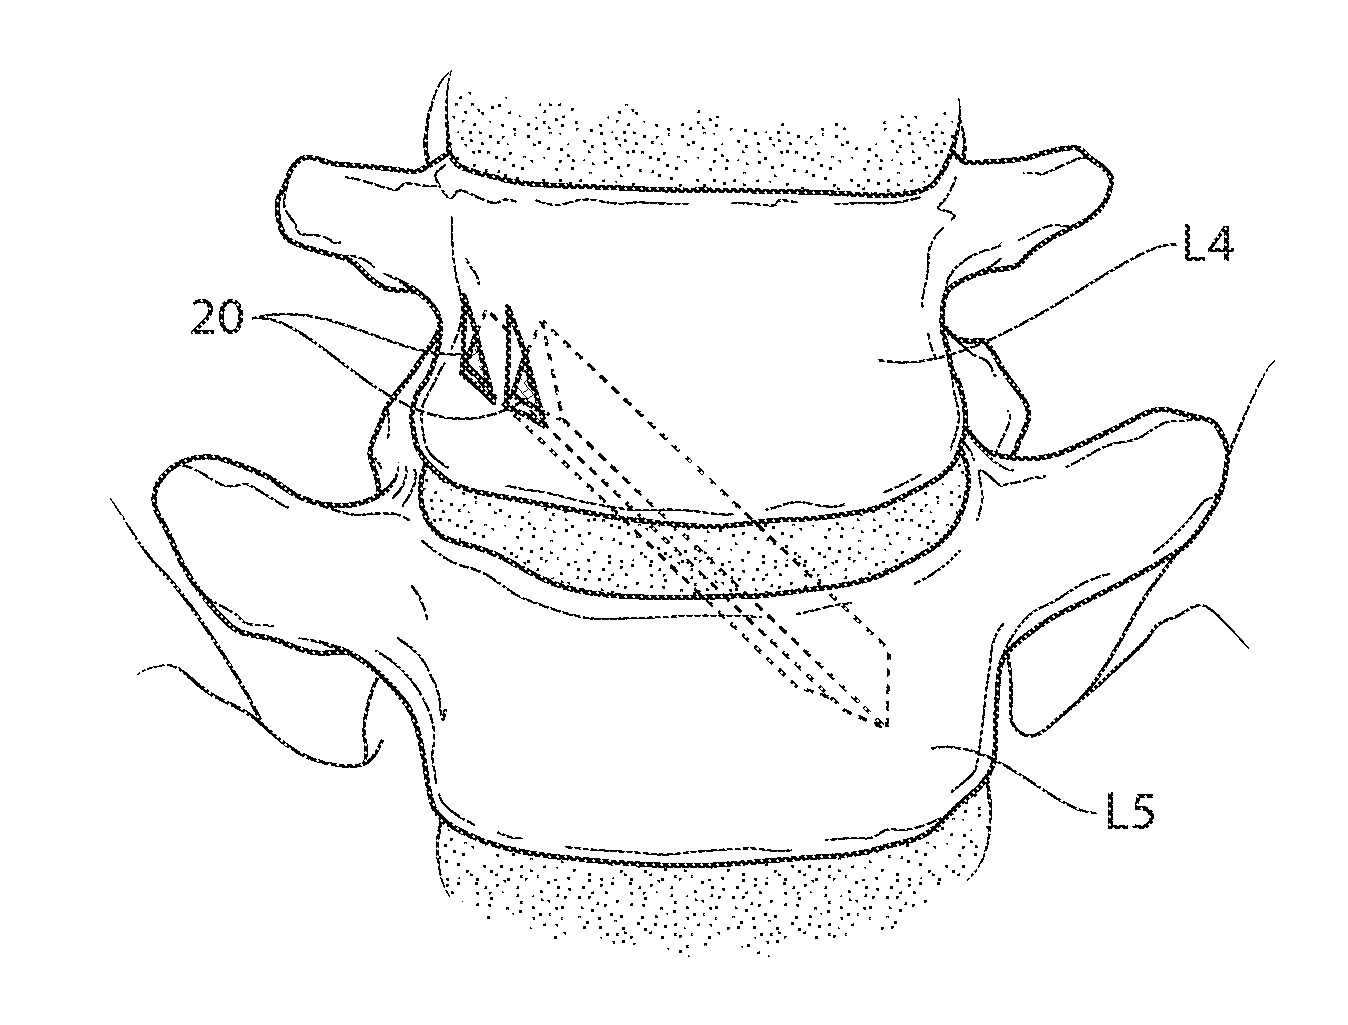 Apparatus, systems, and methods for achieving trans-iliac lumbar fusion